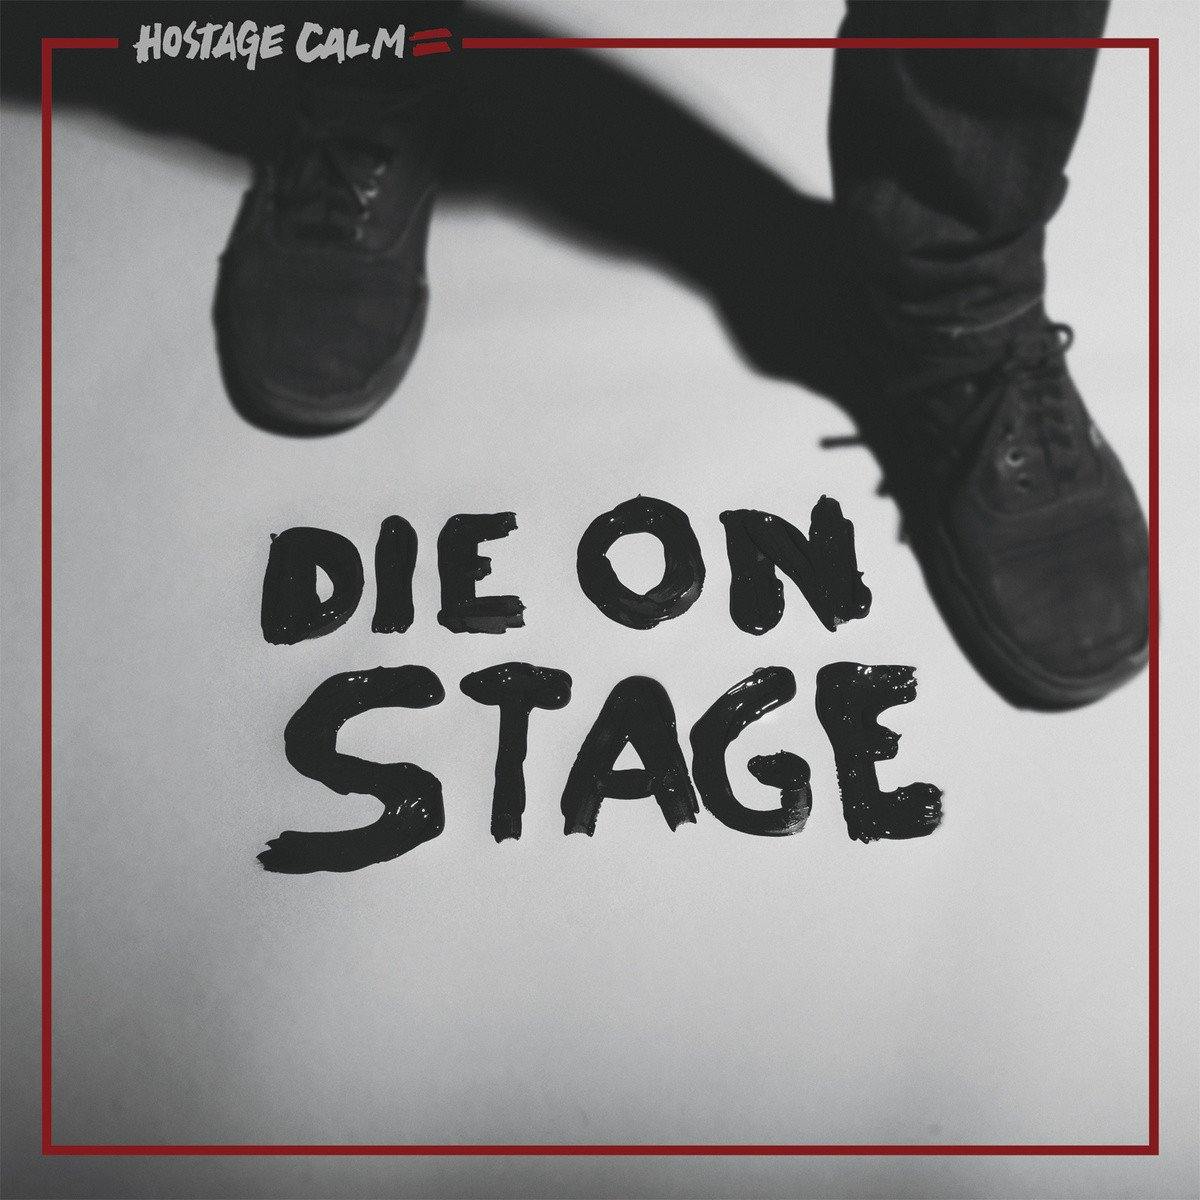 Buy – Hostage Calm "Die On Stage" – Band & Music Merch – Cold Cuts Merch